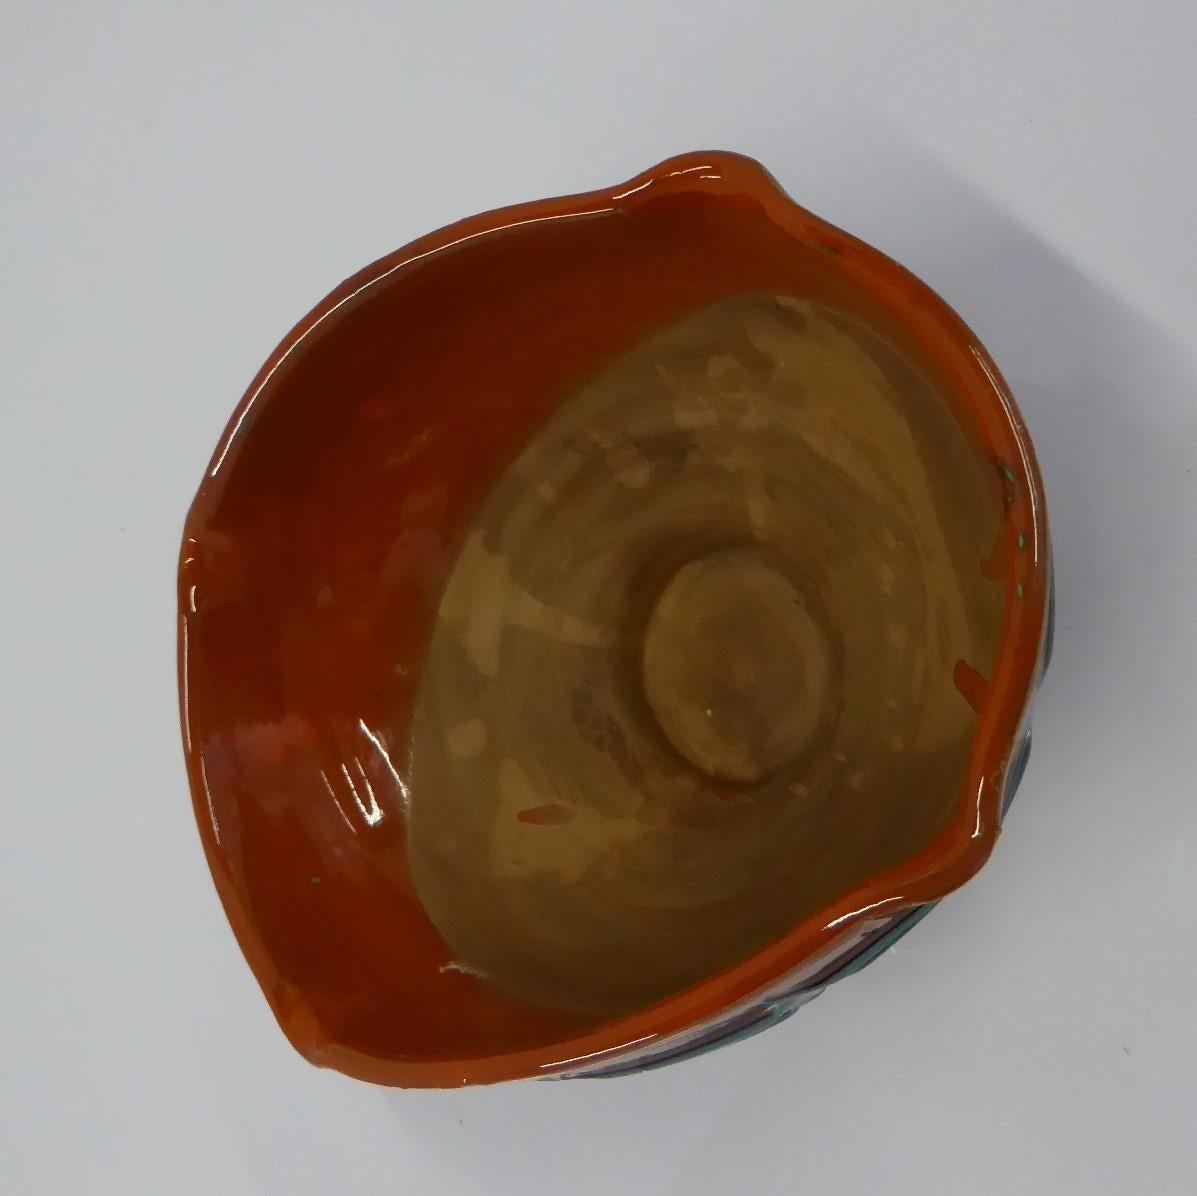 Mid-Century Modern Italian pottery vase made by Fratelli Fanciullacci in the early 1960s for the US distributor Melrose. This oval shaped bowl with pinched corners has a glossy drip orange-red glaze over a terracotta body and decorated with an